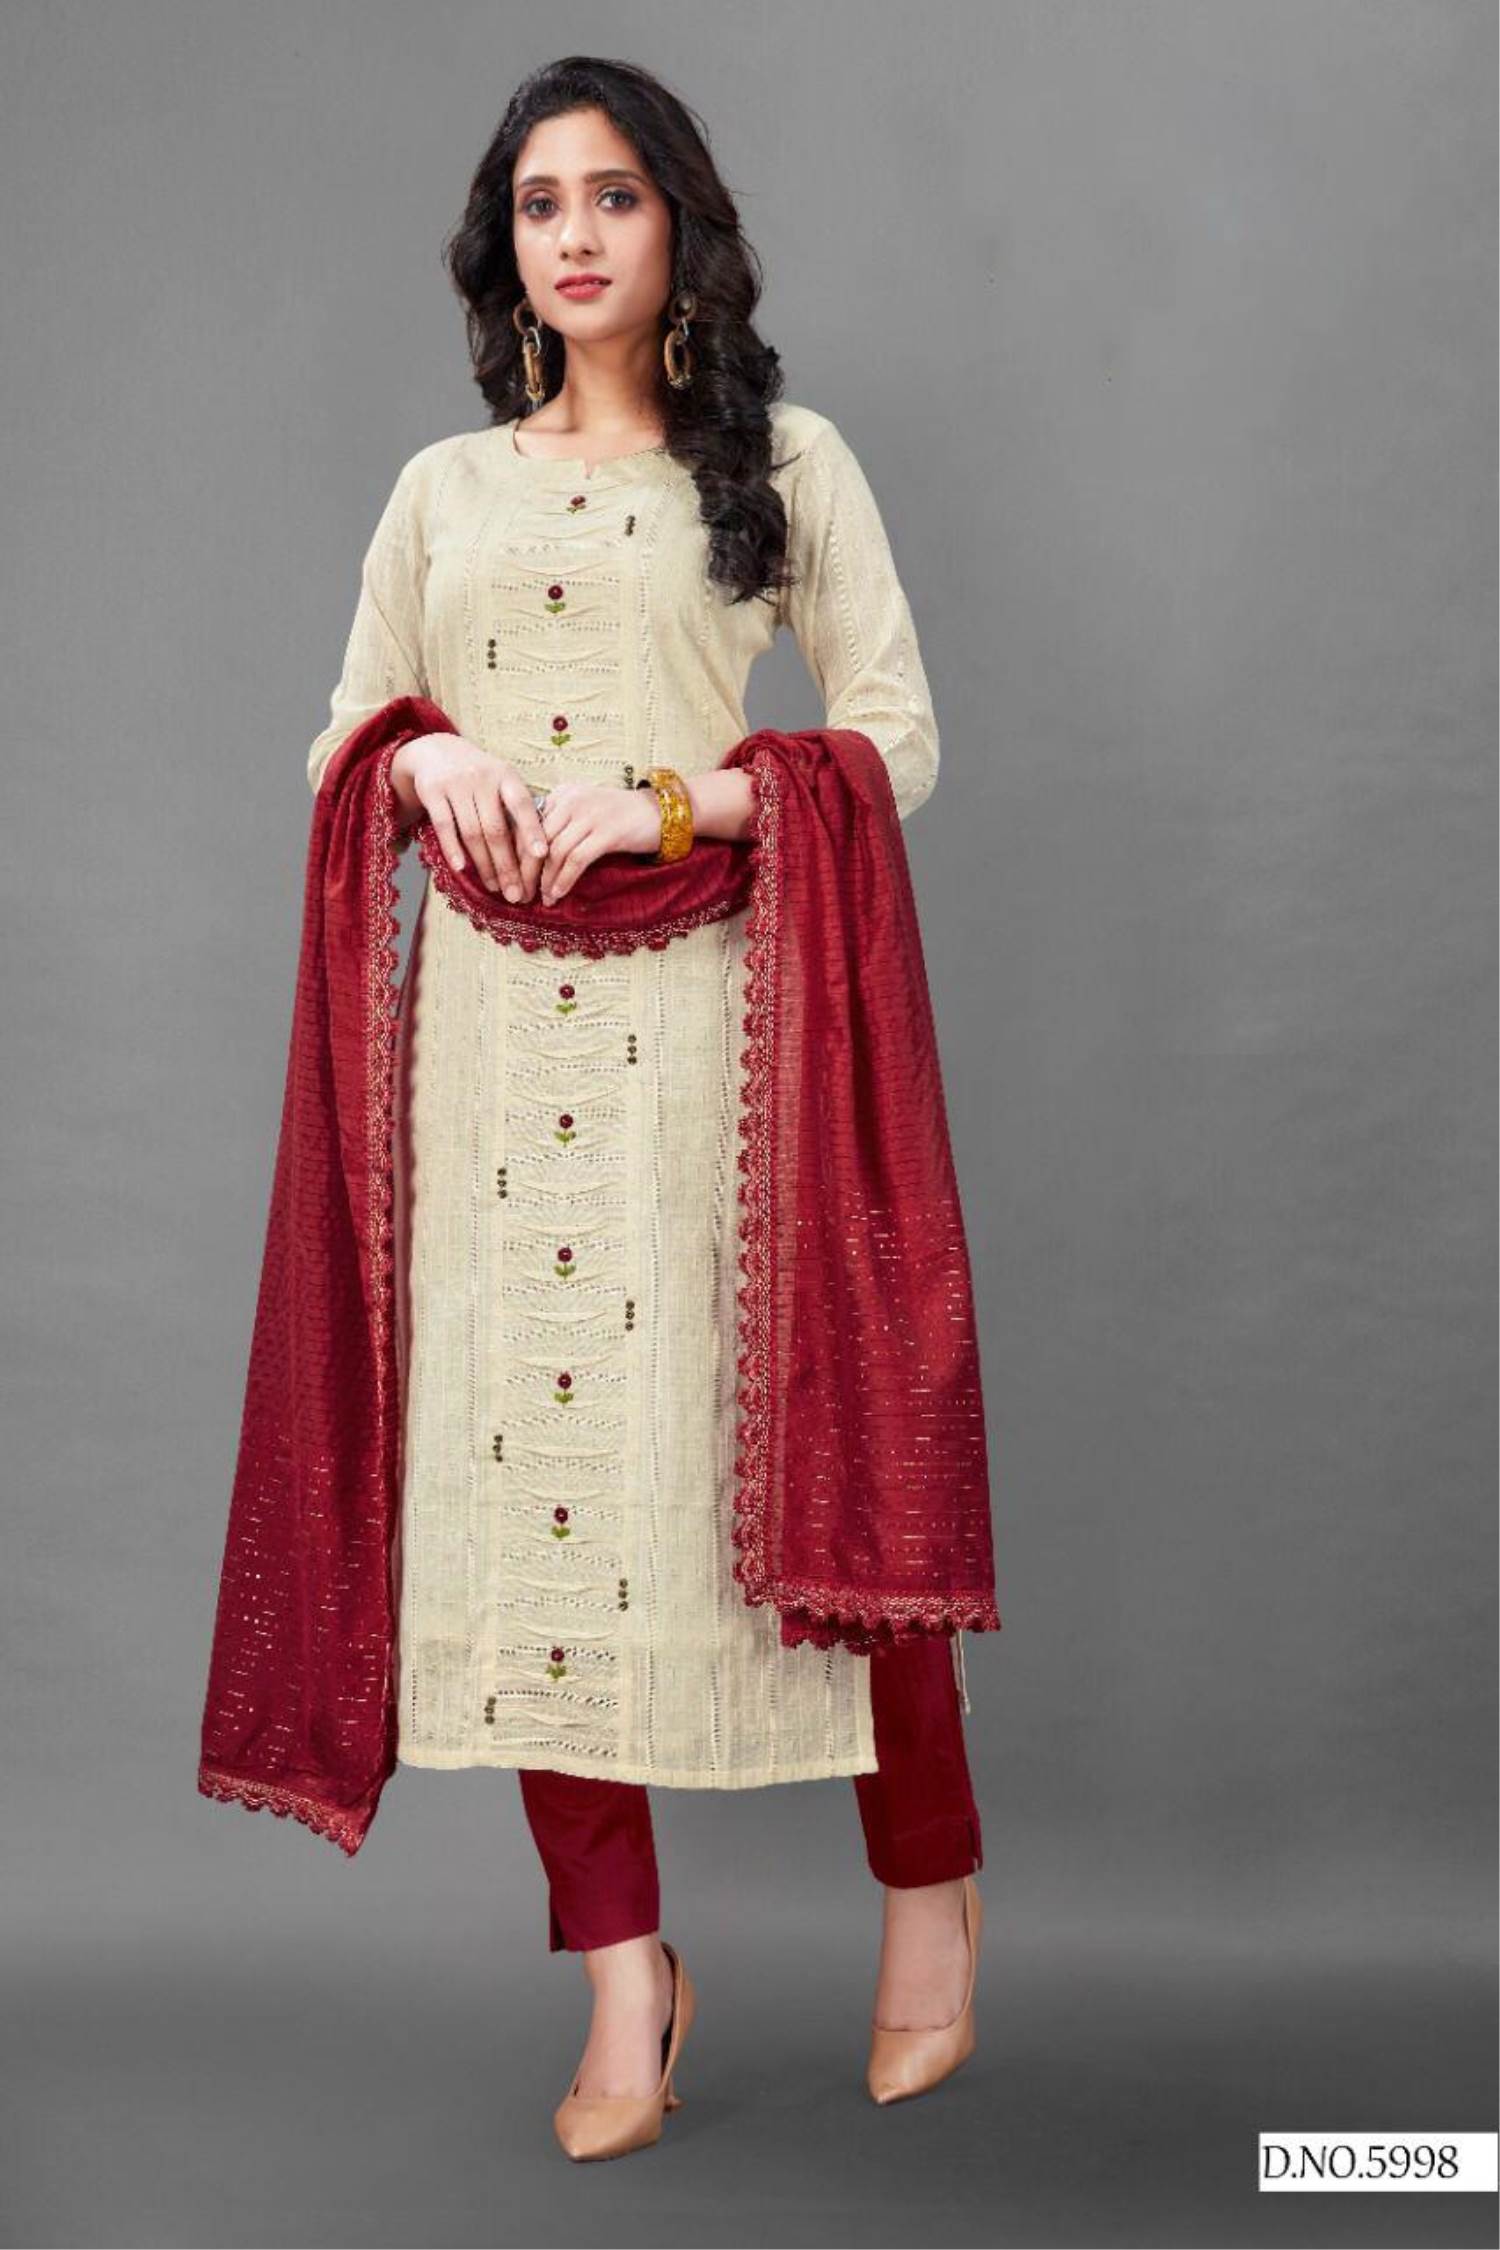 Thankar Heavy Premium Cotton With Embroidery Kurti at Rs 275/piece in Surat